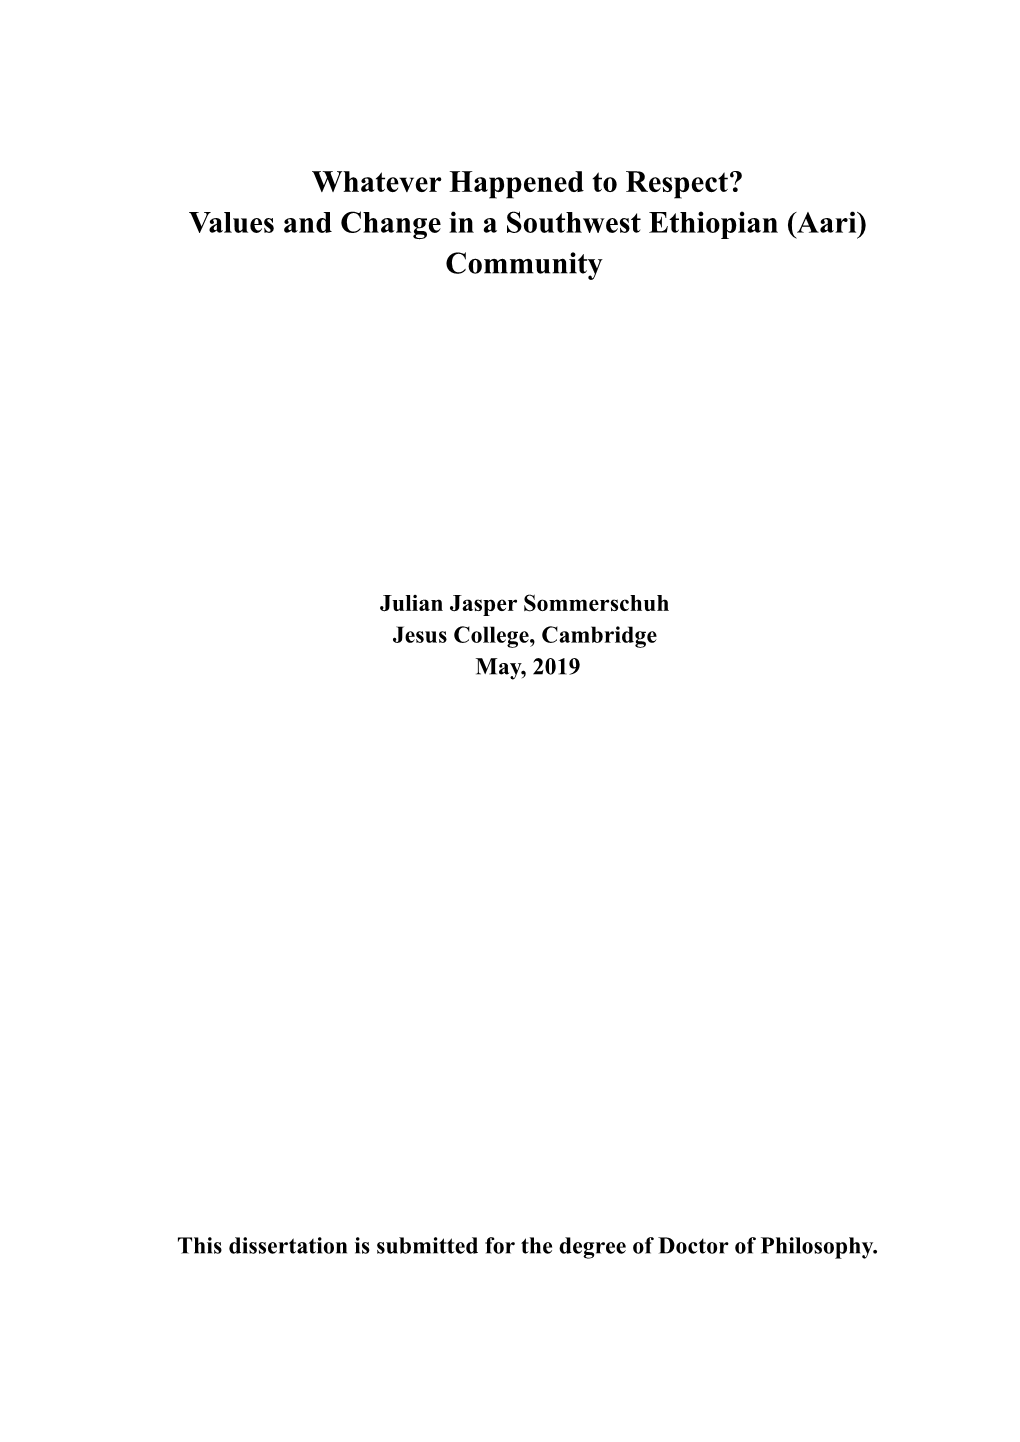 Values and Change in a Southwest Ethiopian (Aari) Community